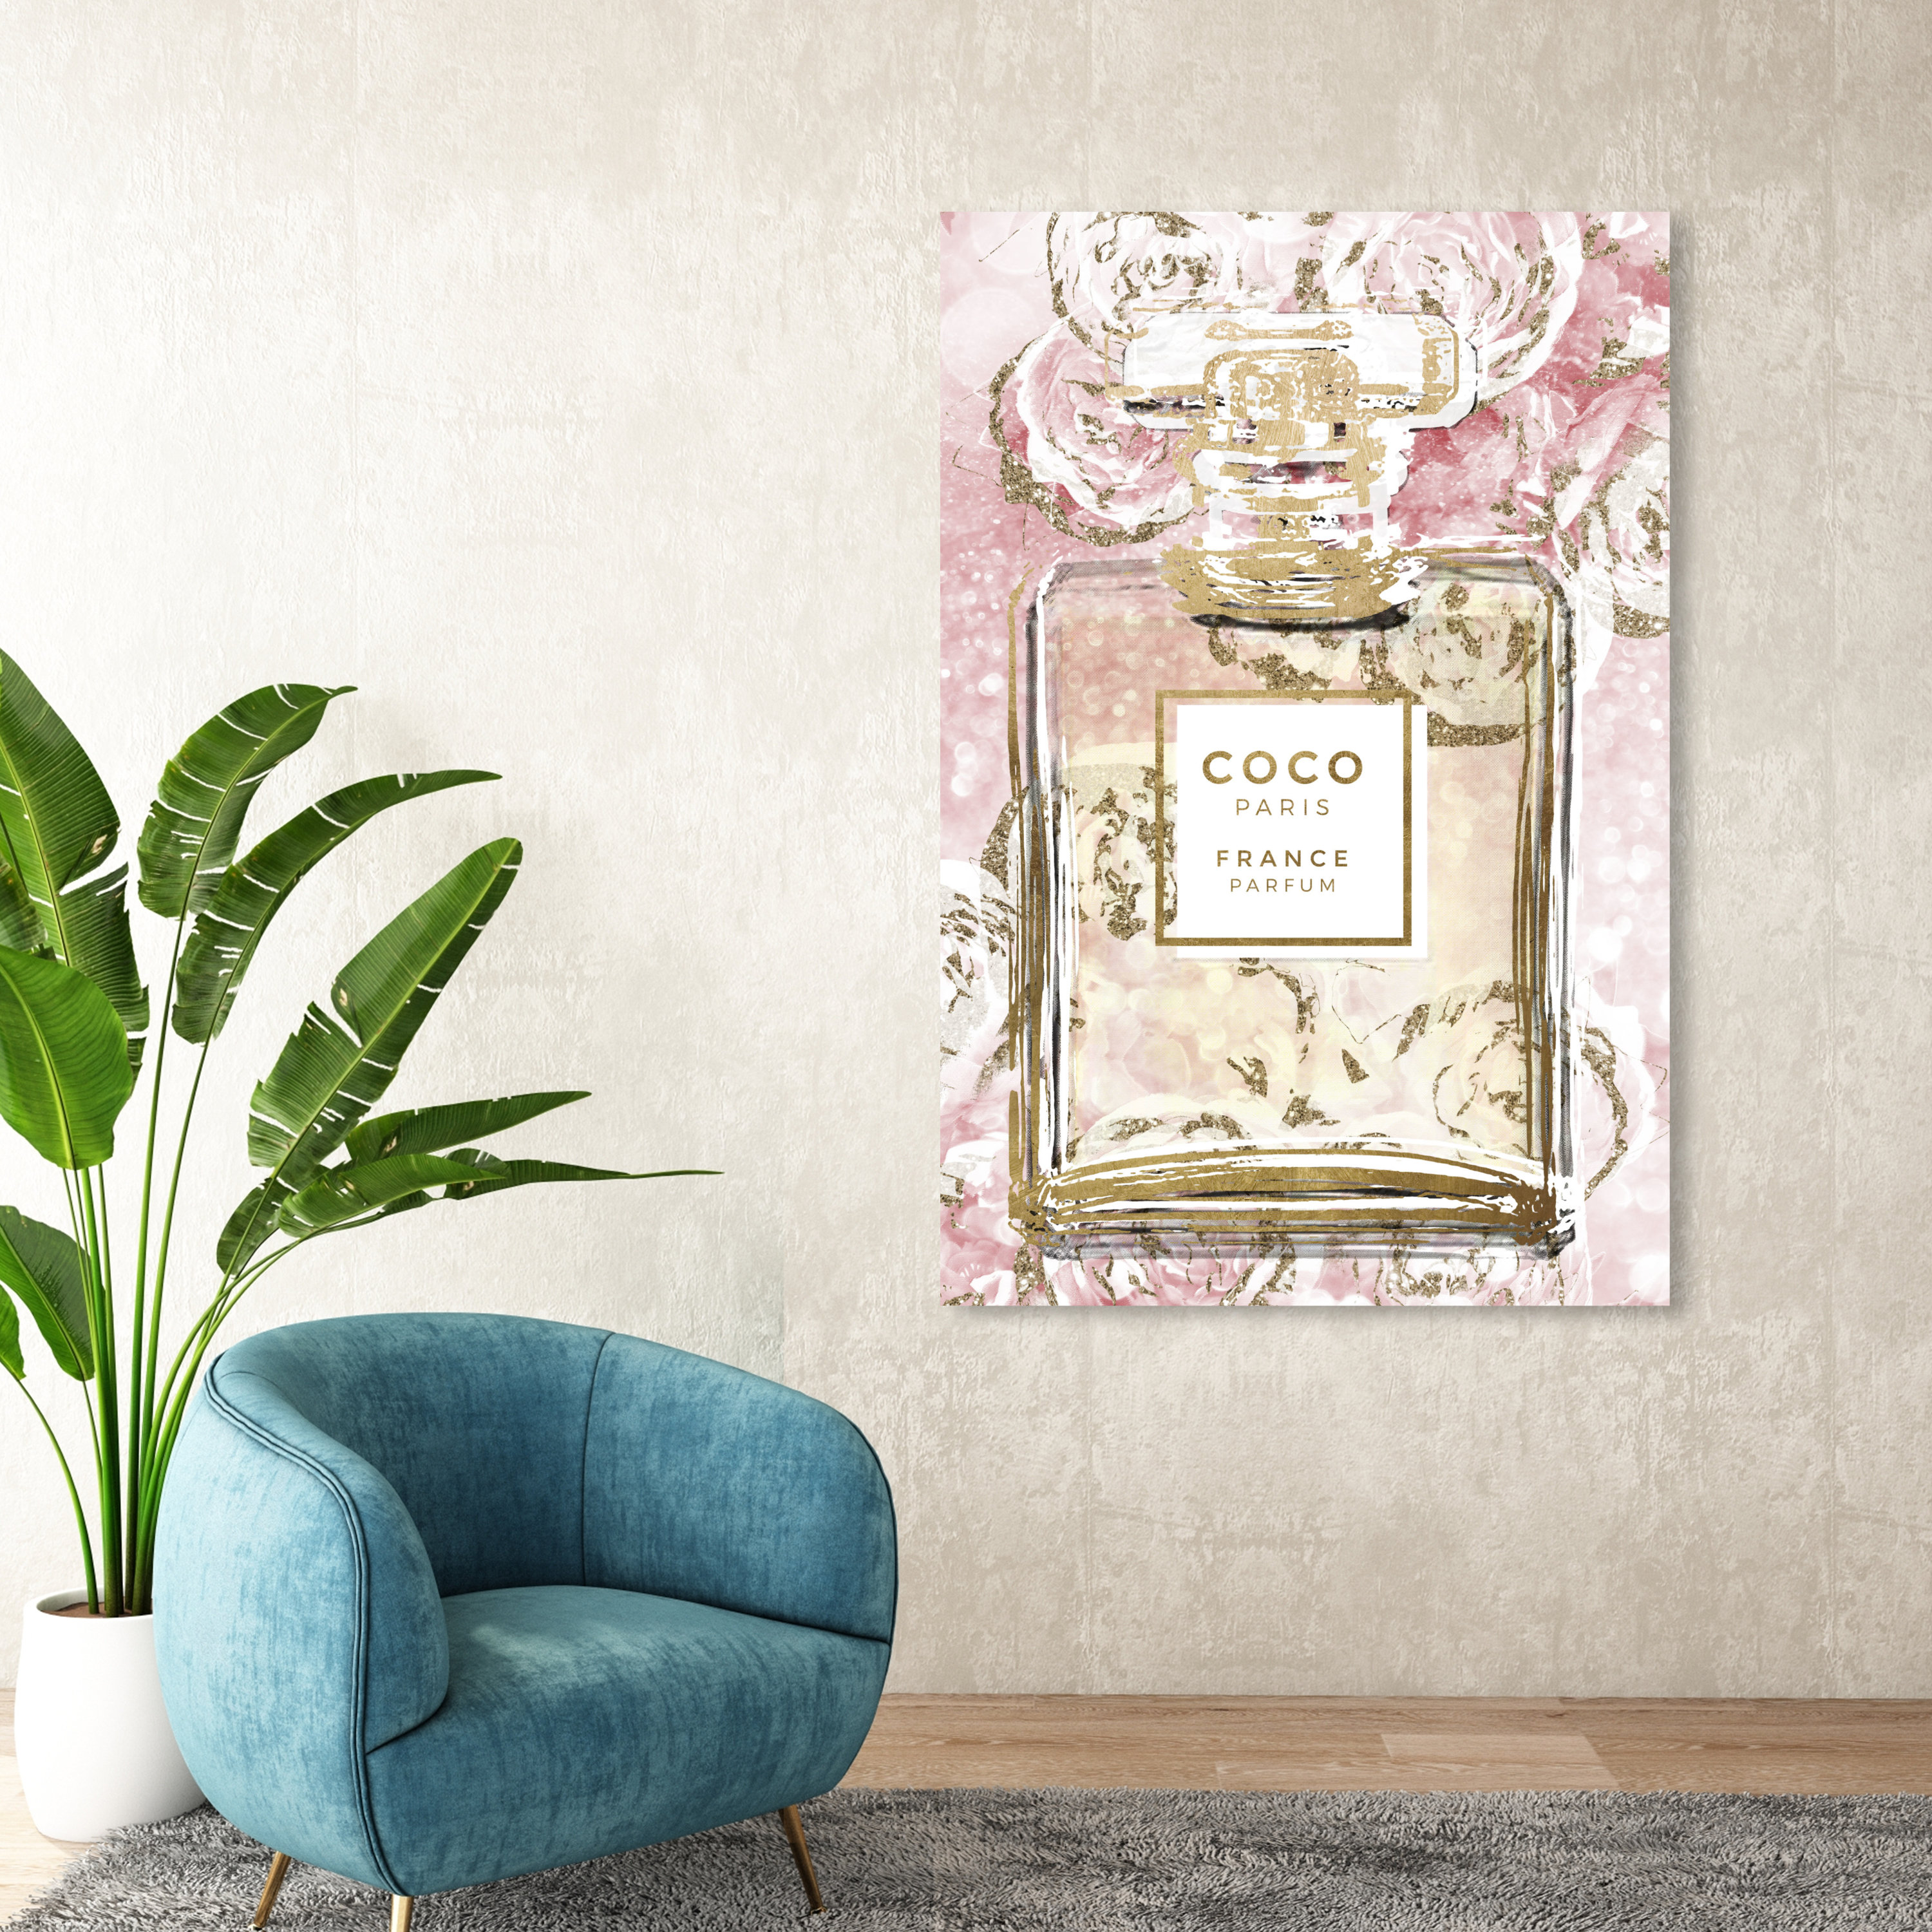 Oliver Gal 'Louie Matiere Noire Perfume' Fashion and Glam Wall Art